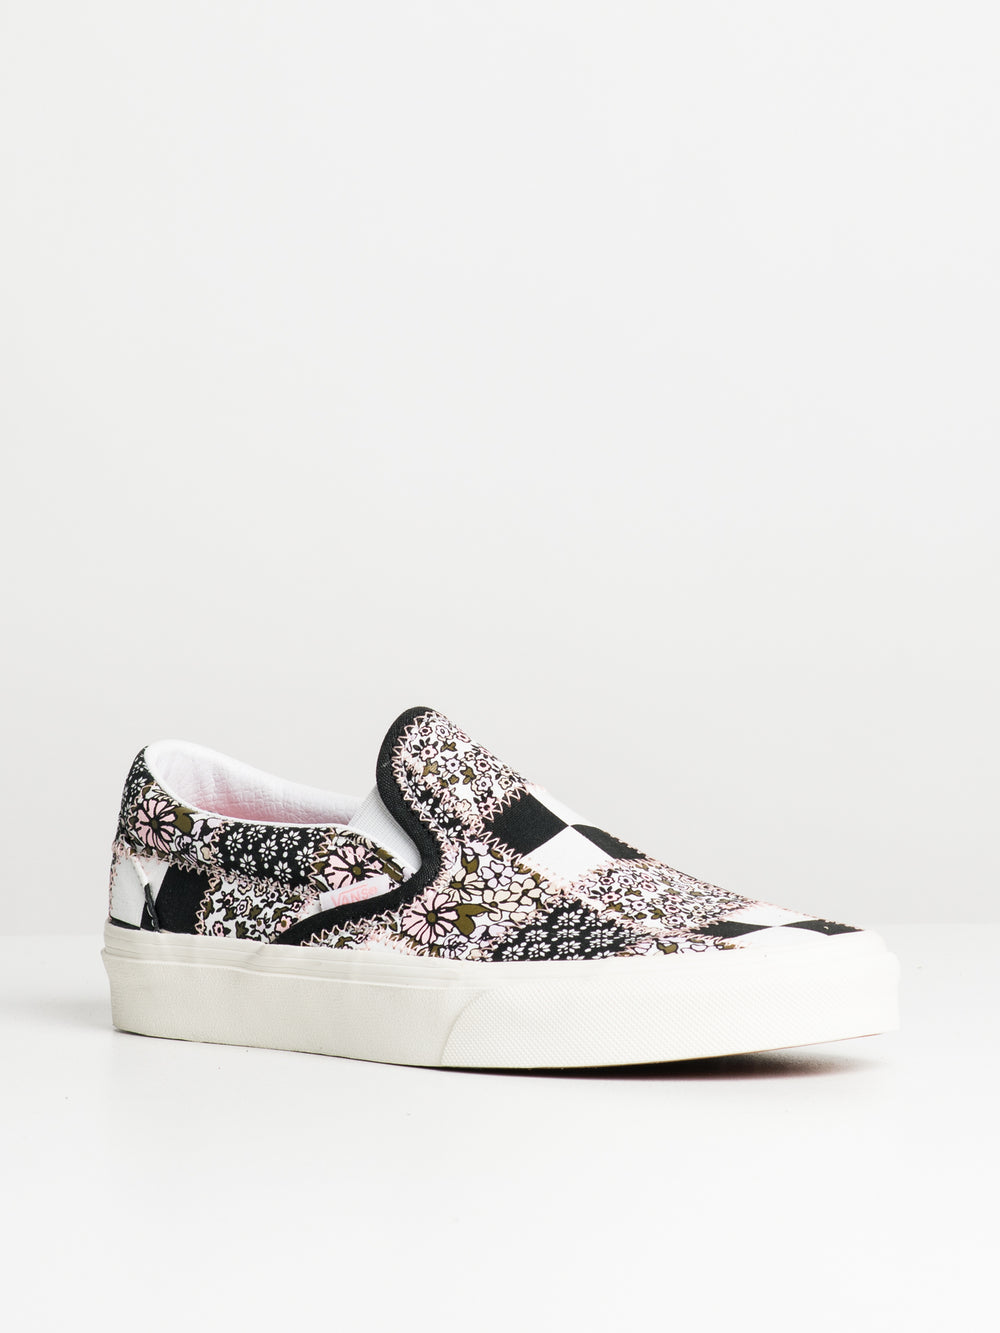 WOMENS VANS CLASSIC SLIP-ON PATCHWORK  - CLEARANCE